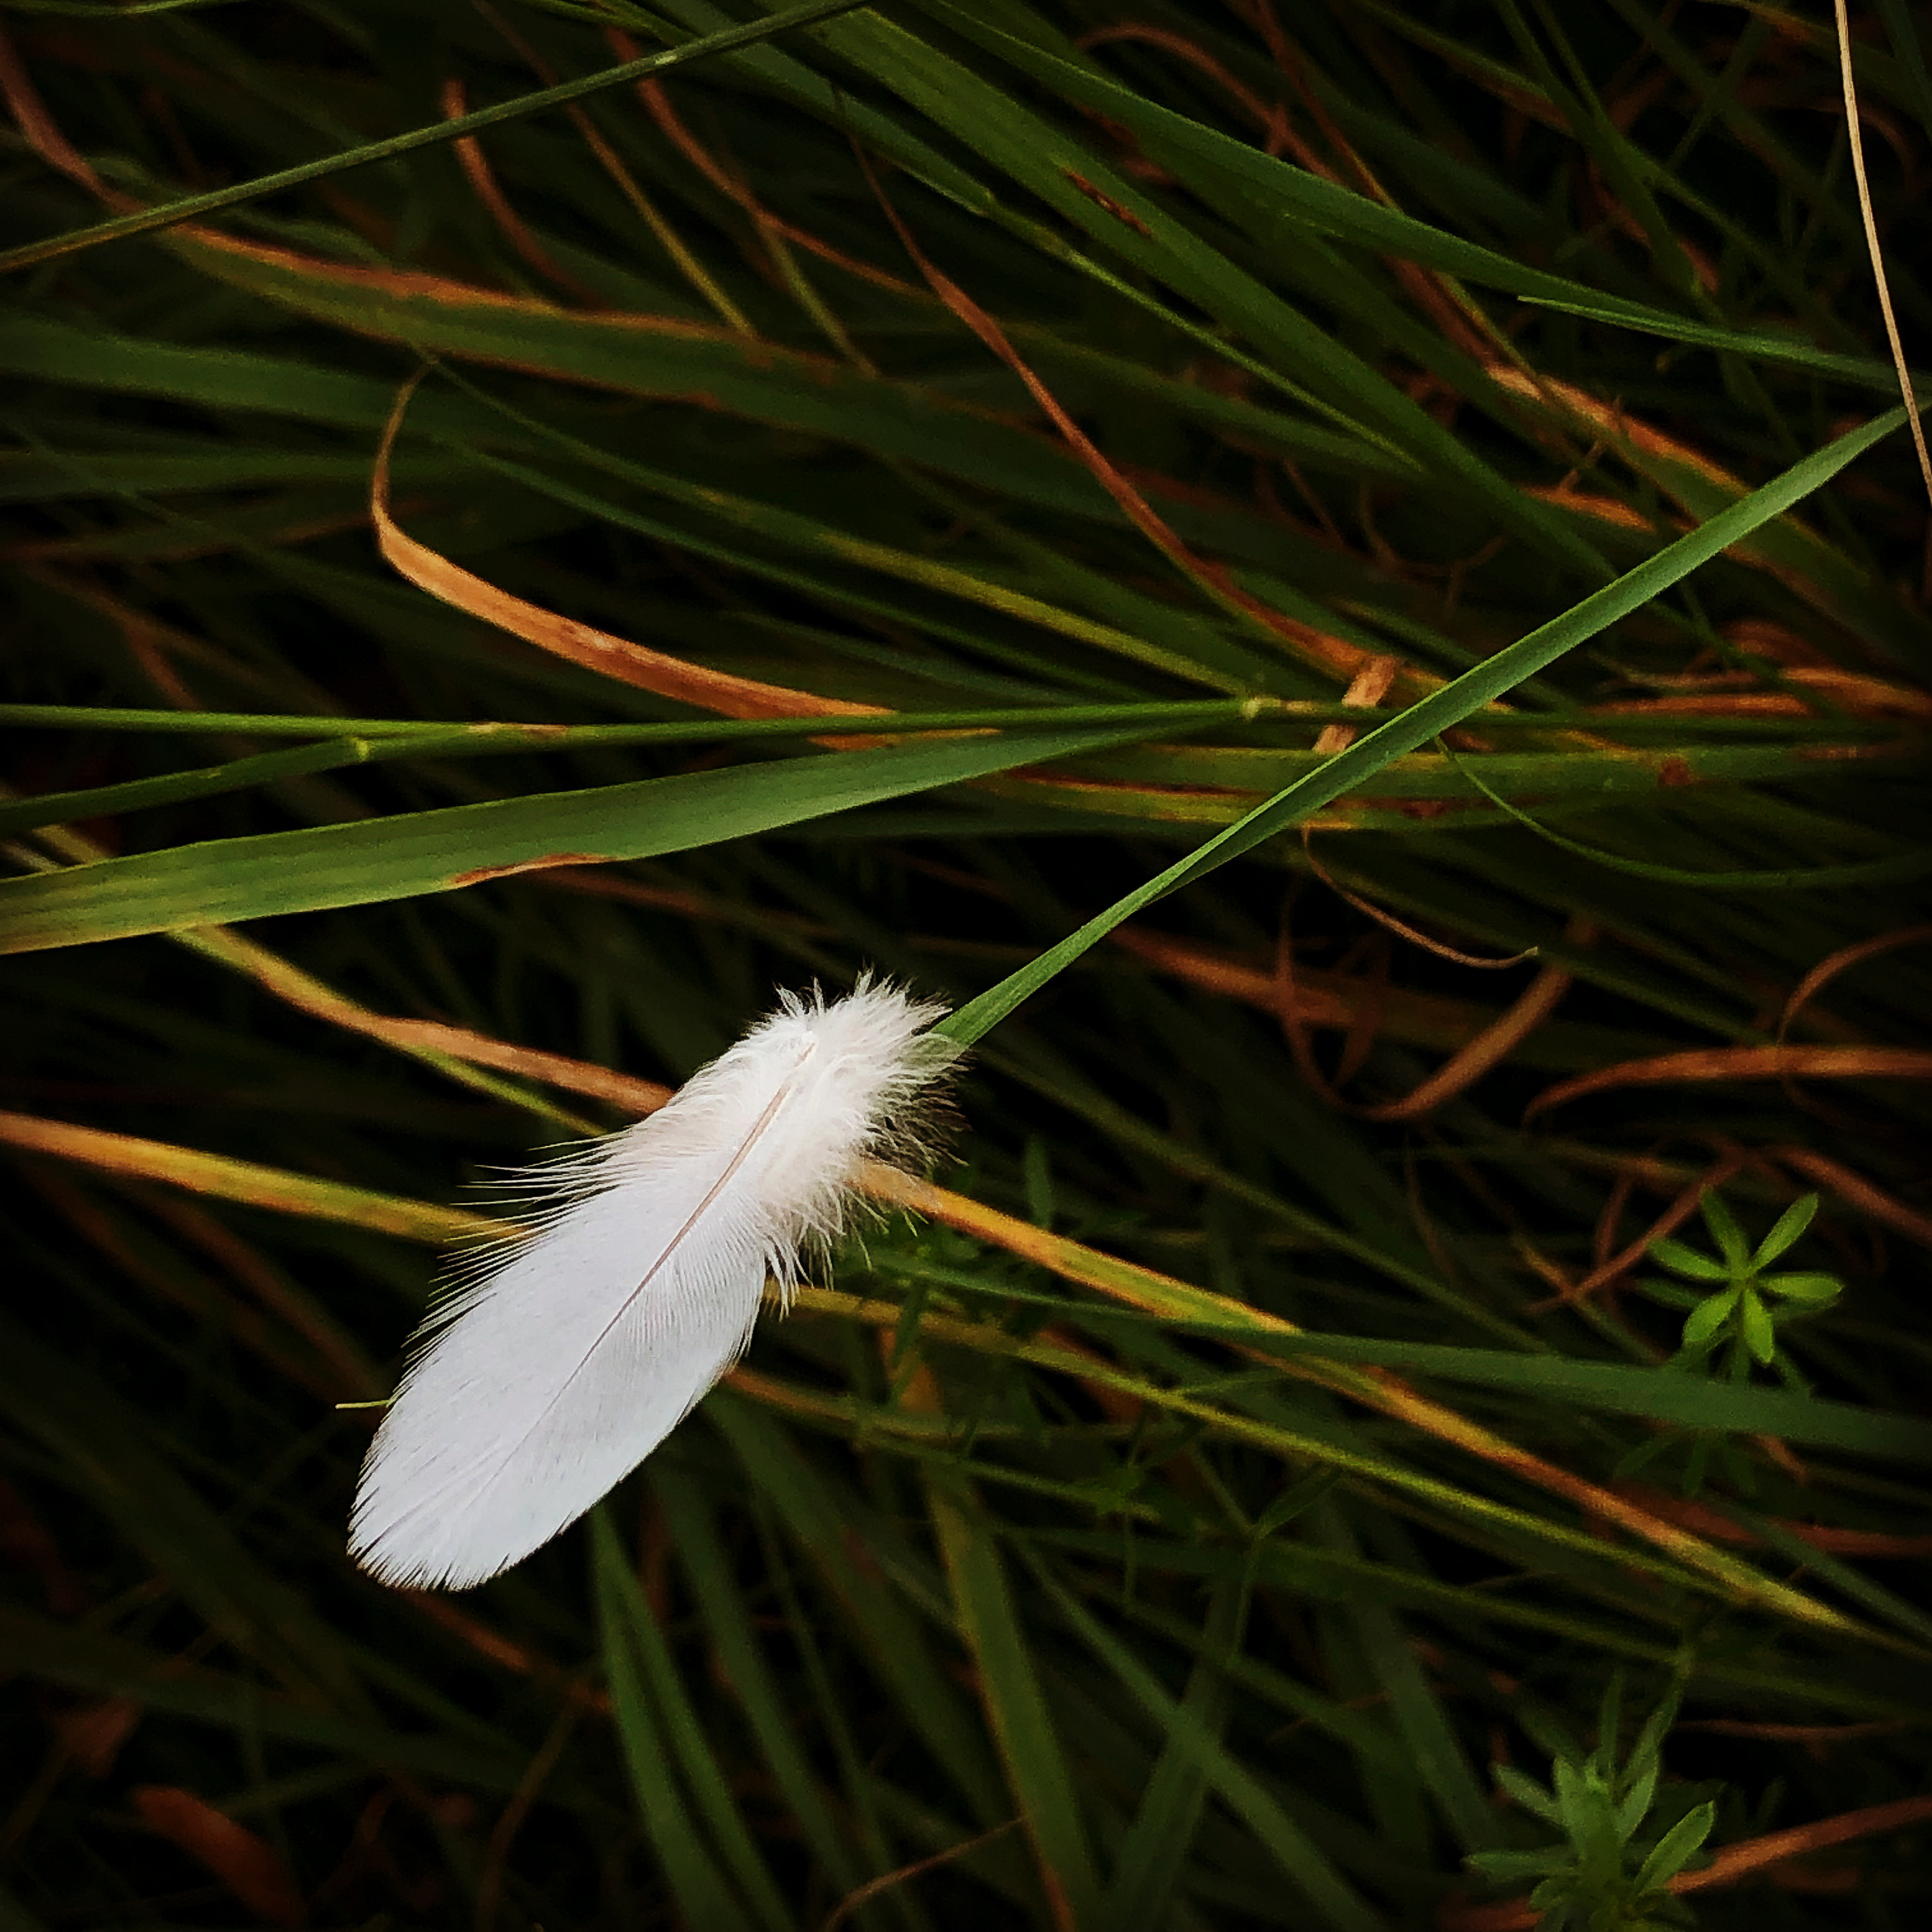 Feather on grass